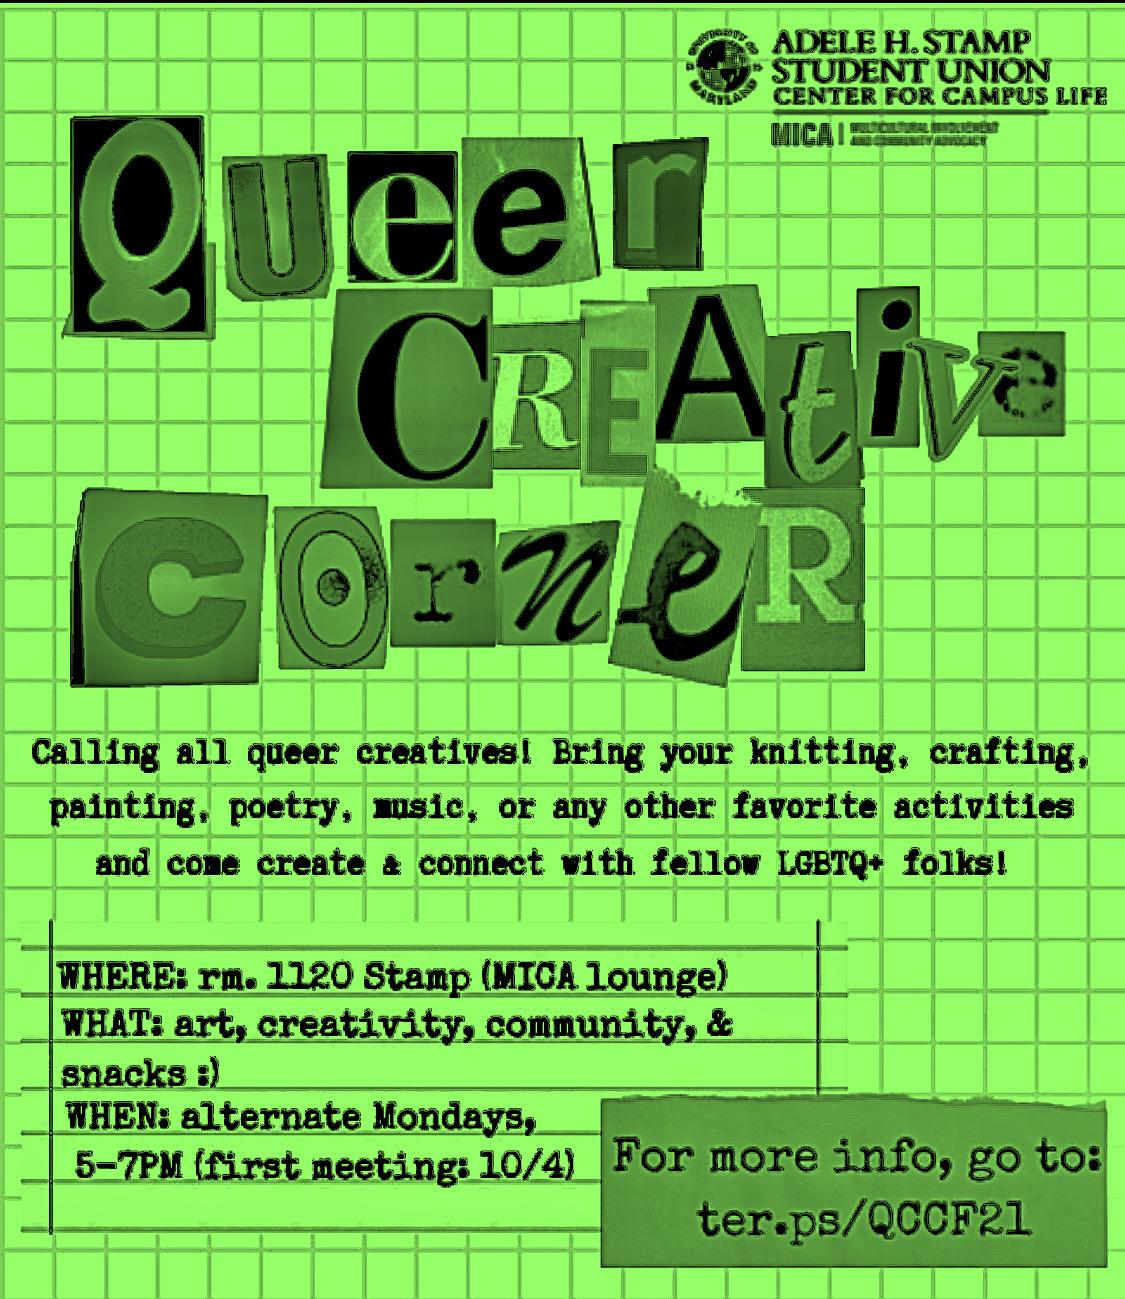 Queer Creative Corner. Calling all queer creatives! Bring your knitting, crafting, painting, poetry, music, or any other favorite activities and come create & connect with fellow LGBTQ+ folks! WHERE: rm 1120 Stamp (MICA lounge). WHAT: art, creativity, community & snacks :) WHEN: alternate Mondays, 5-7pm (10/4, 10/18, 11/1, 11/15, 11/29, 12/13 )  